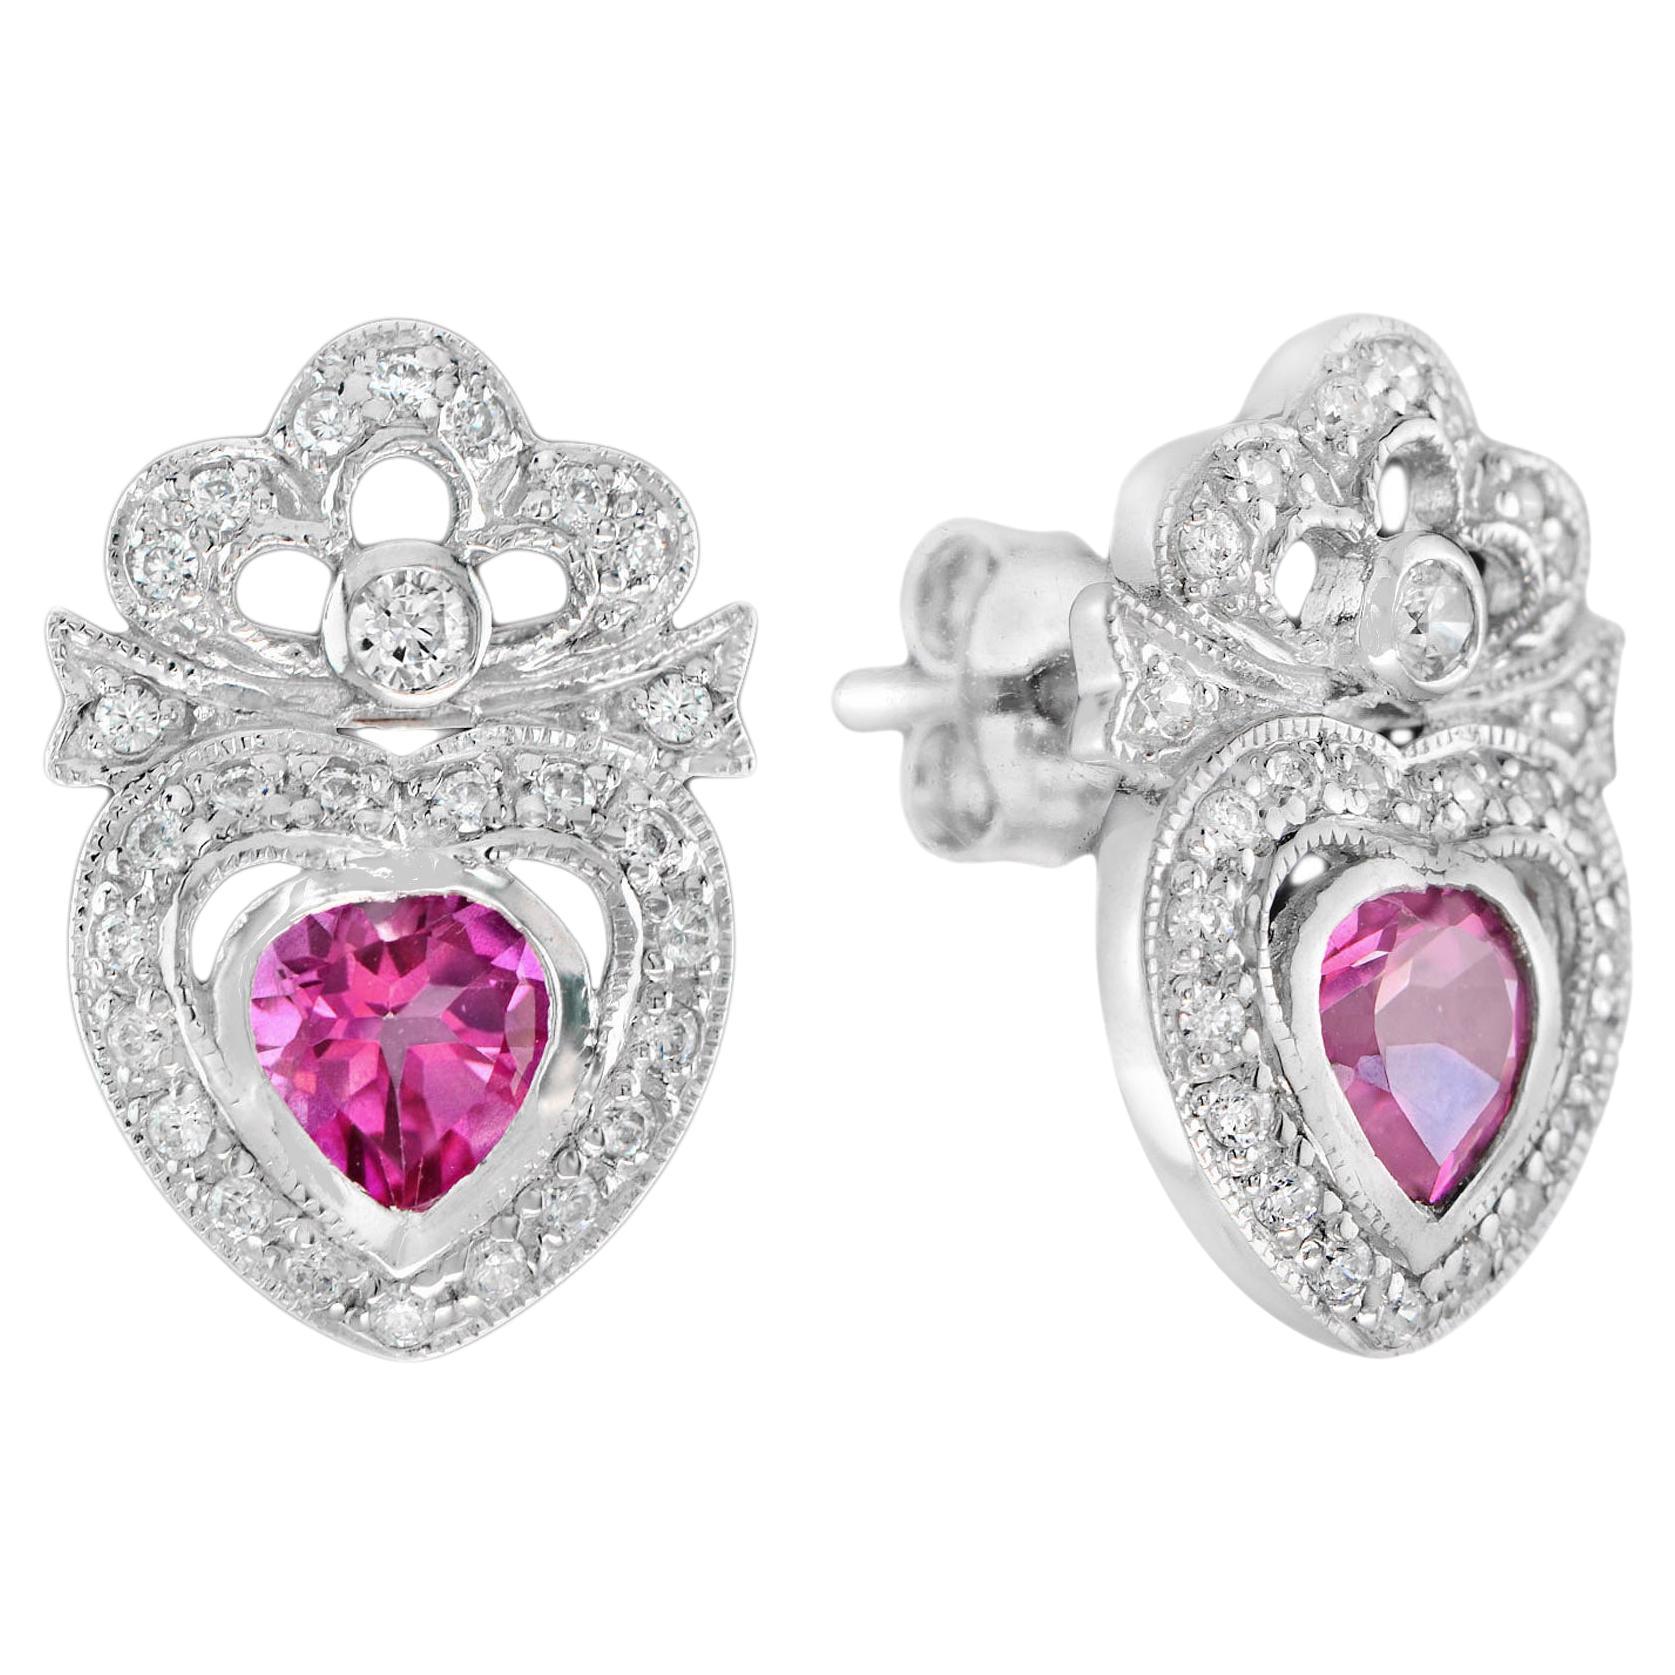 ITALY Pink Heart Push Back Stud Earrings in Pink Topaz in 18K White Gold Plated 